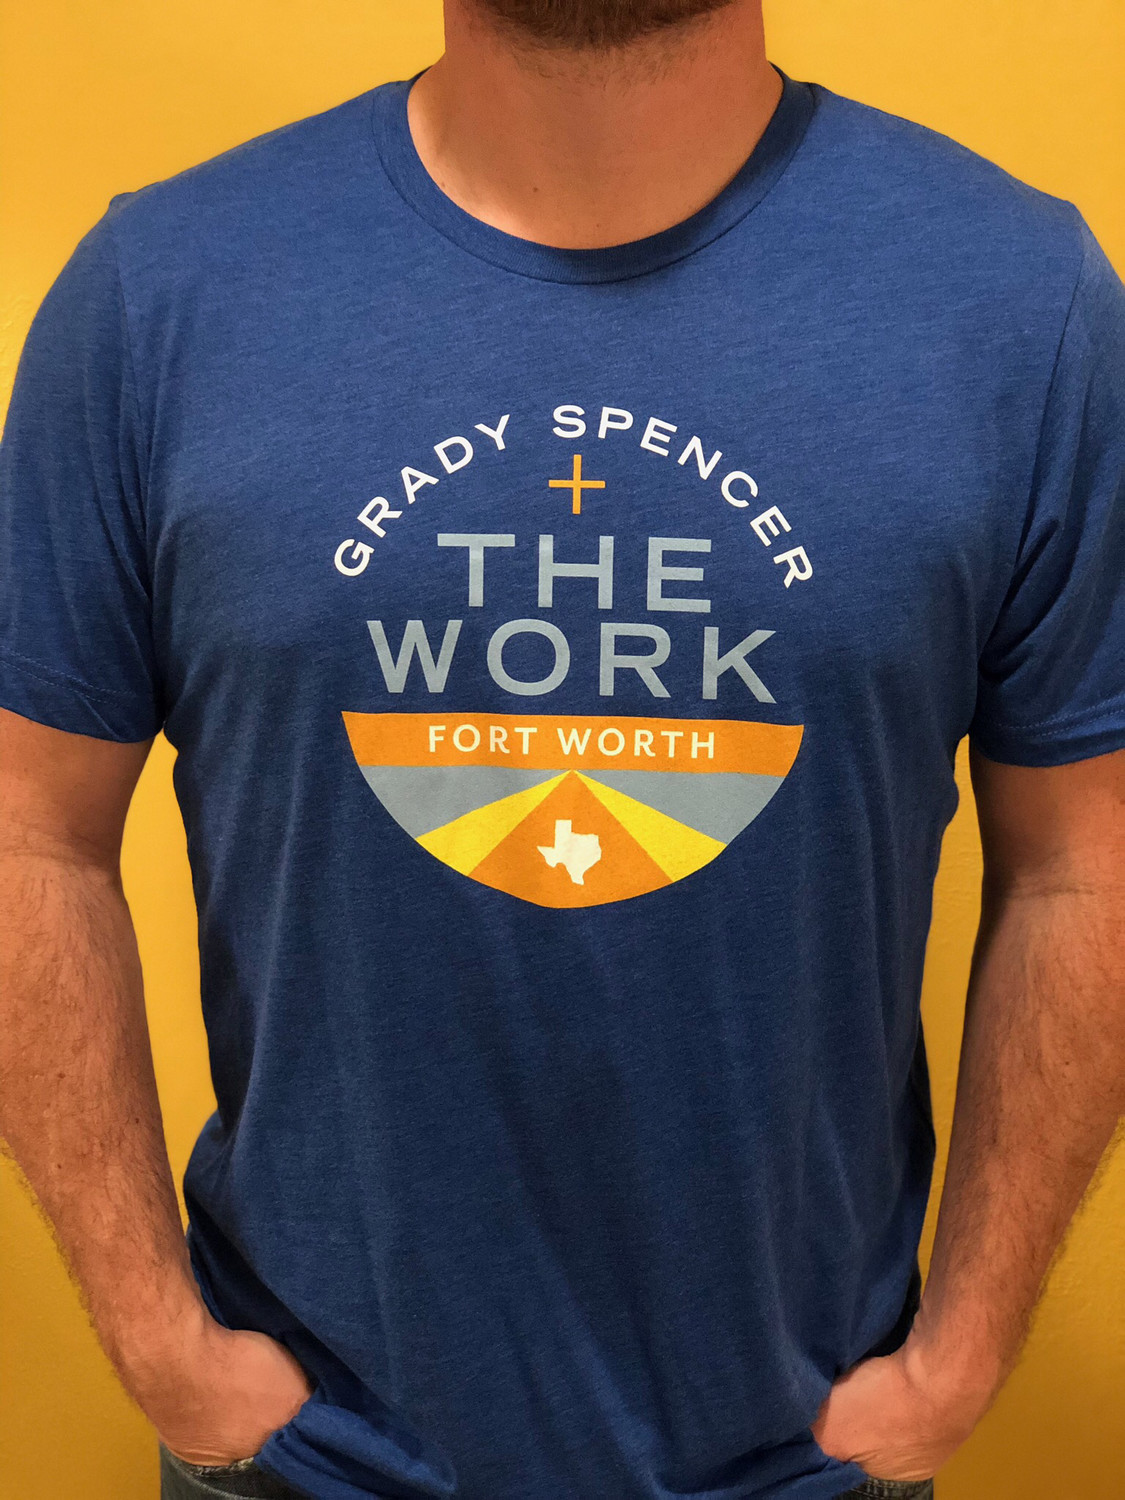 Short Sleeve Fort Worth Circle Tee - SMALL ONLY